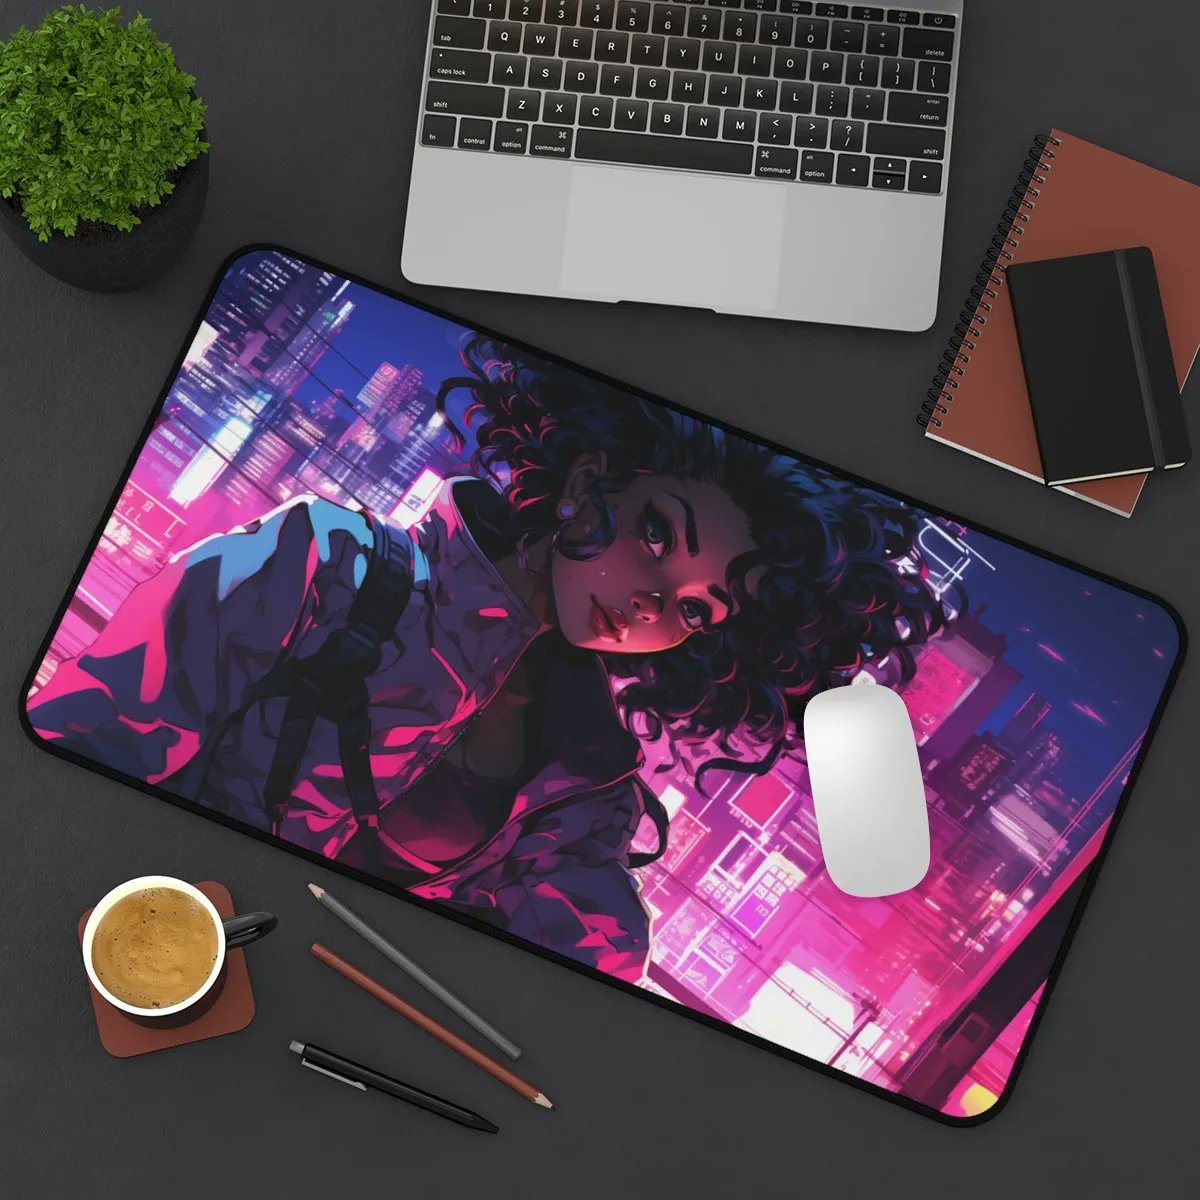 New in Town Afro Anime Desk Mat👀🩷🪮 Available exclusively at Intellects Emporium🪄🧙🏿‍♂️👇🏿 intellectsemporium.com/product/new-in… #AIイラスト #aigirls #AIArtwork #AIart #afronation #afrobeats #afroanime #tuesdayvibe #deskmat #waifu